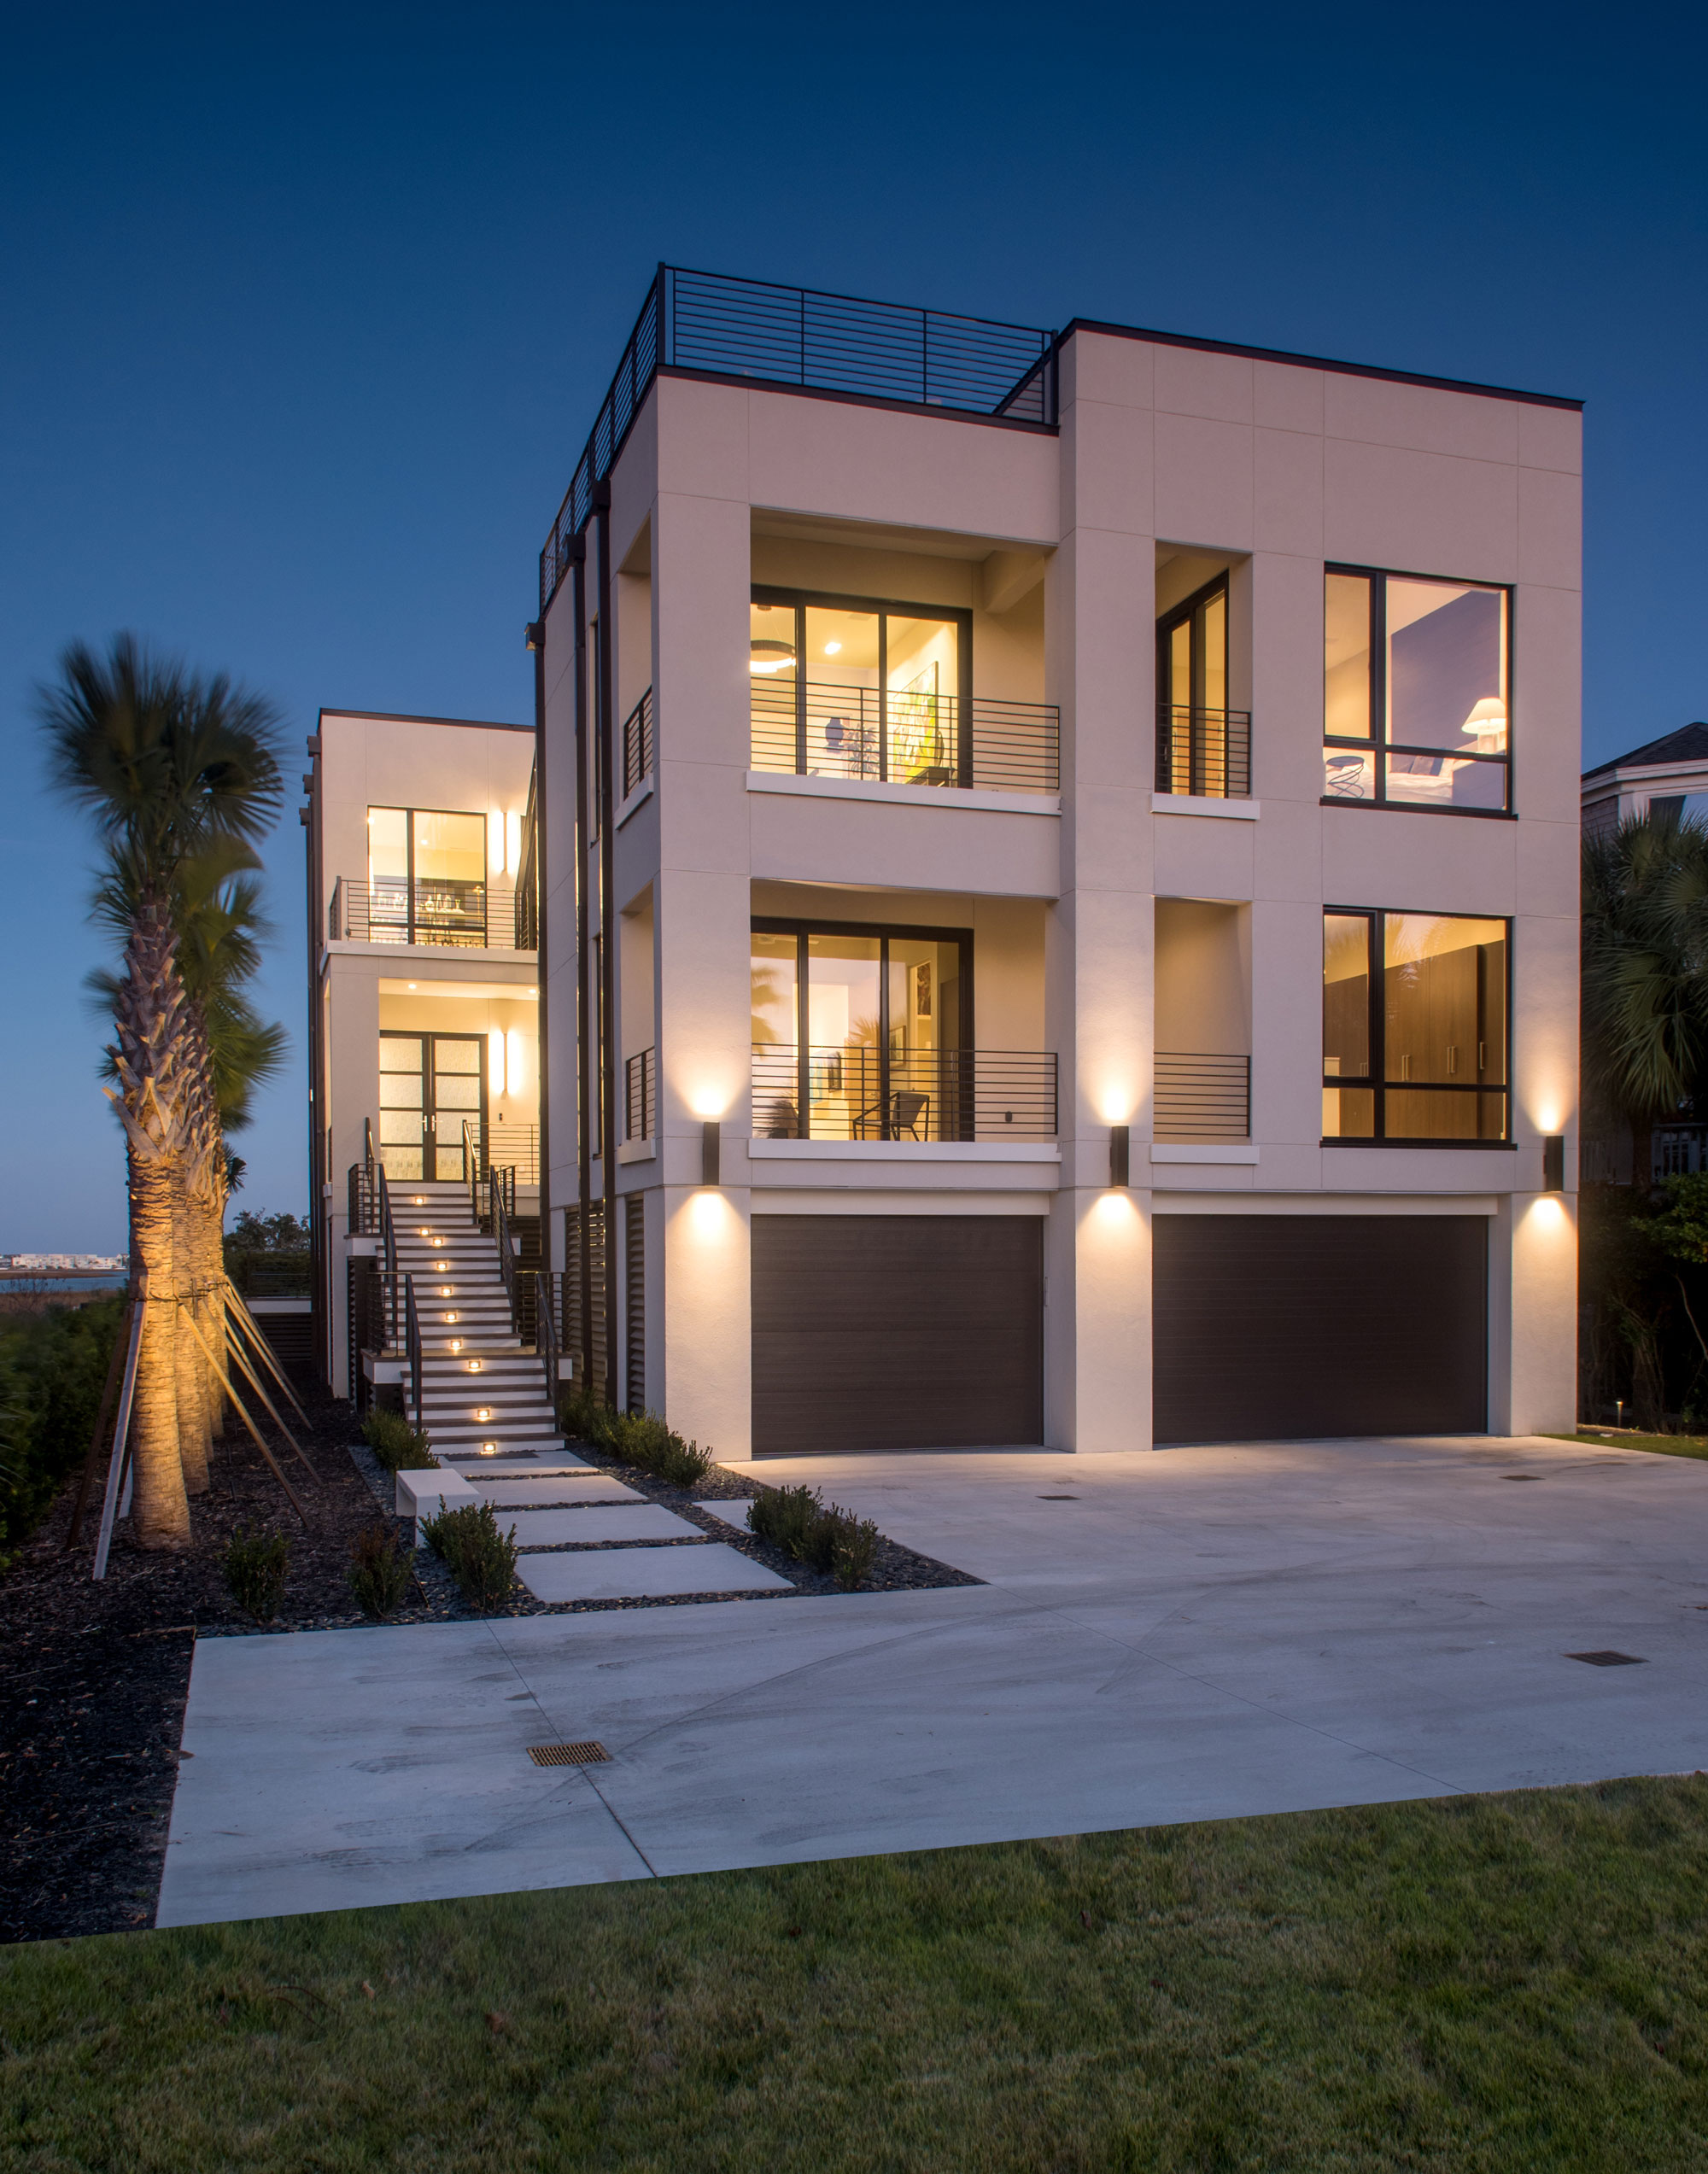 Night view of the front exterior of new home on Sullivan's Island